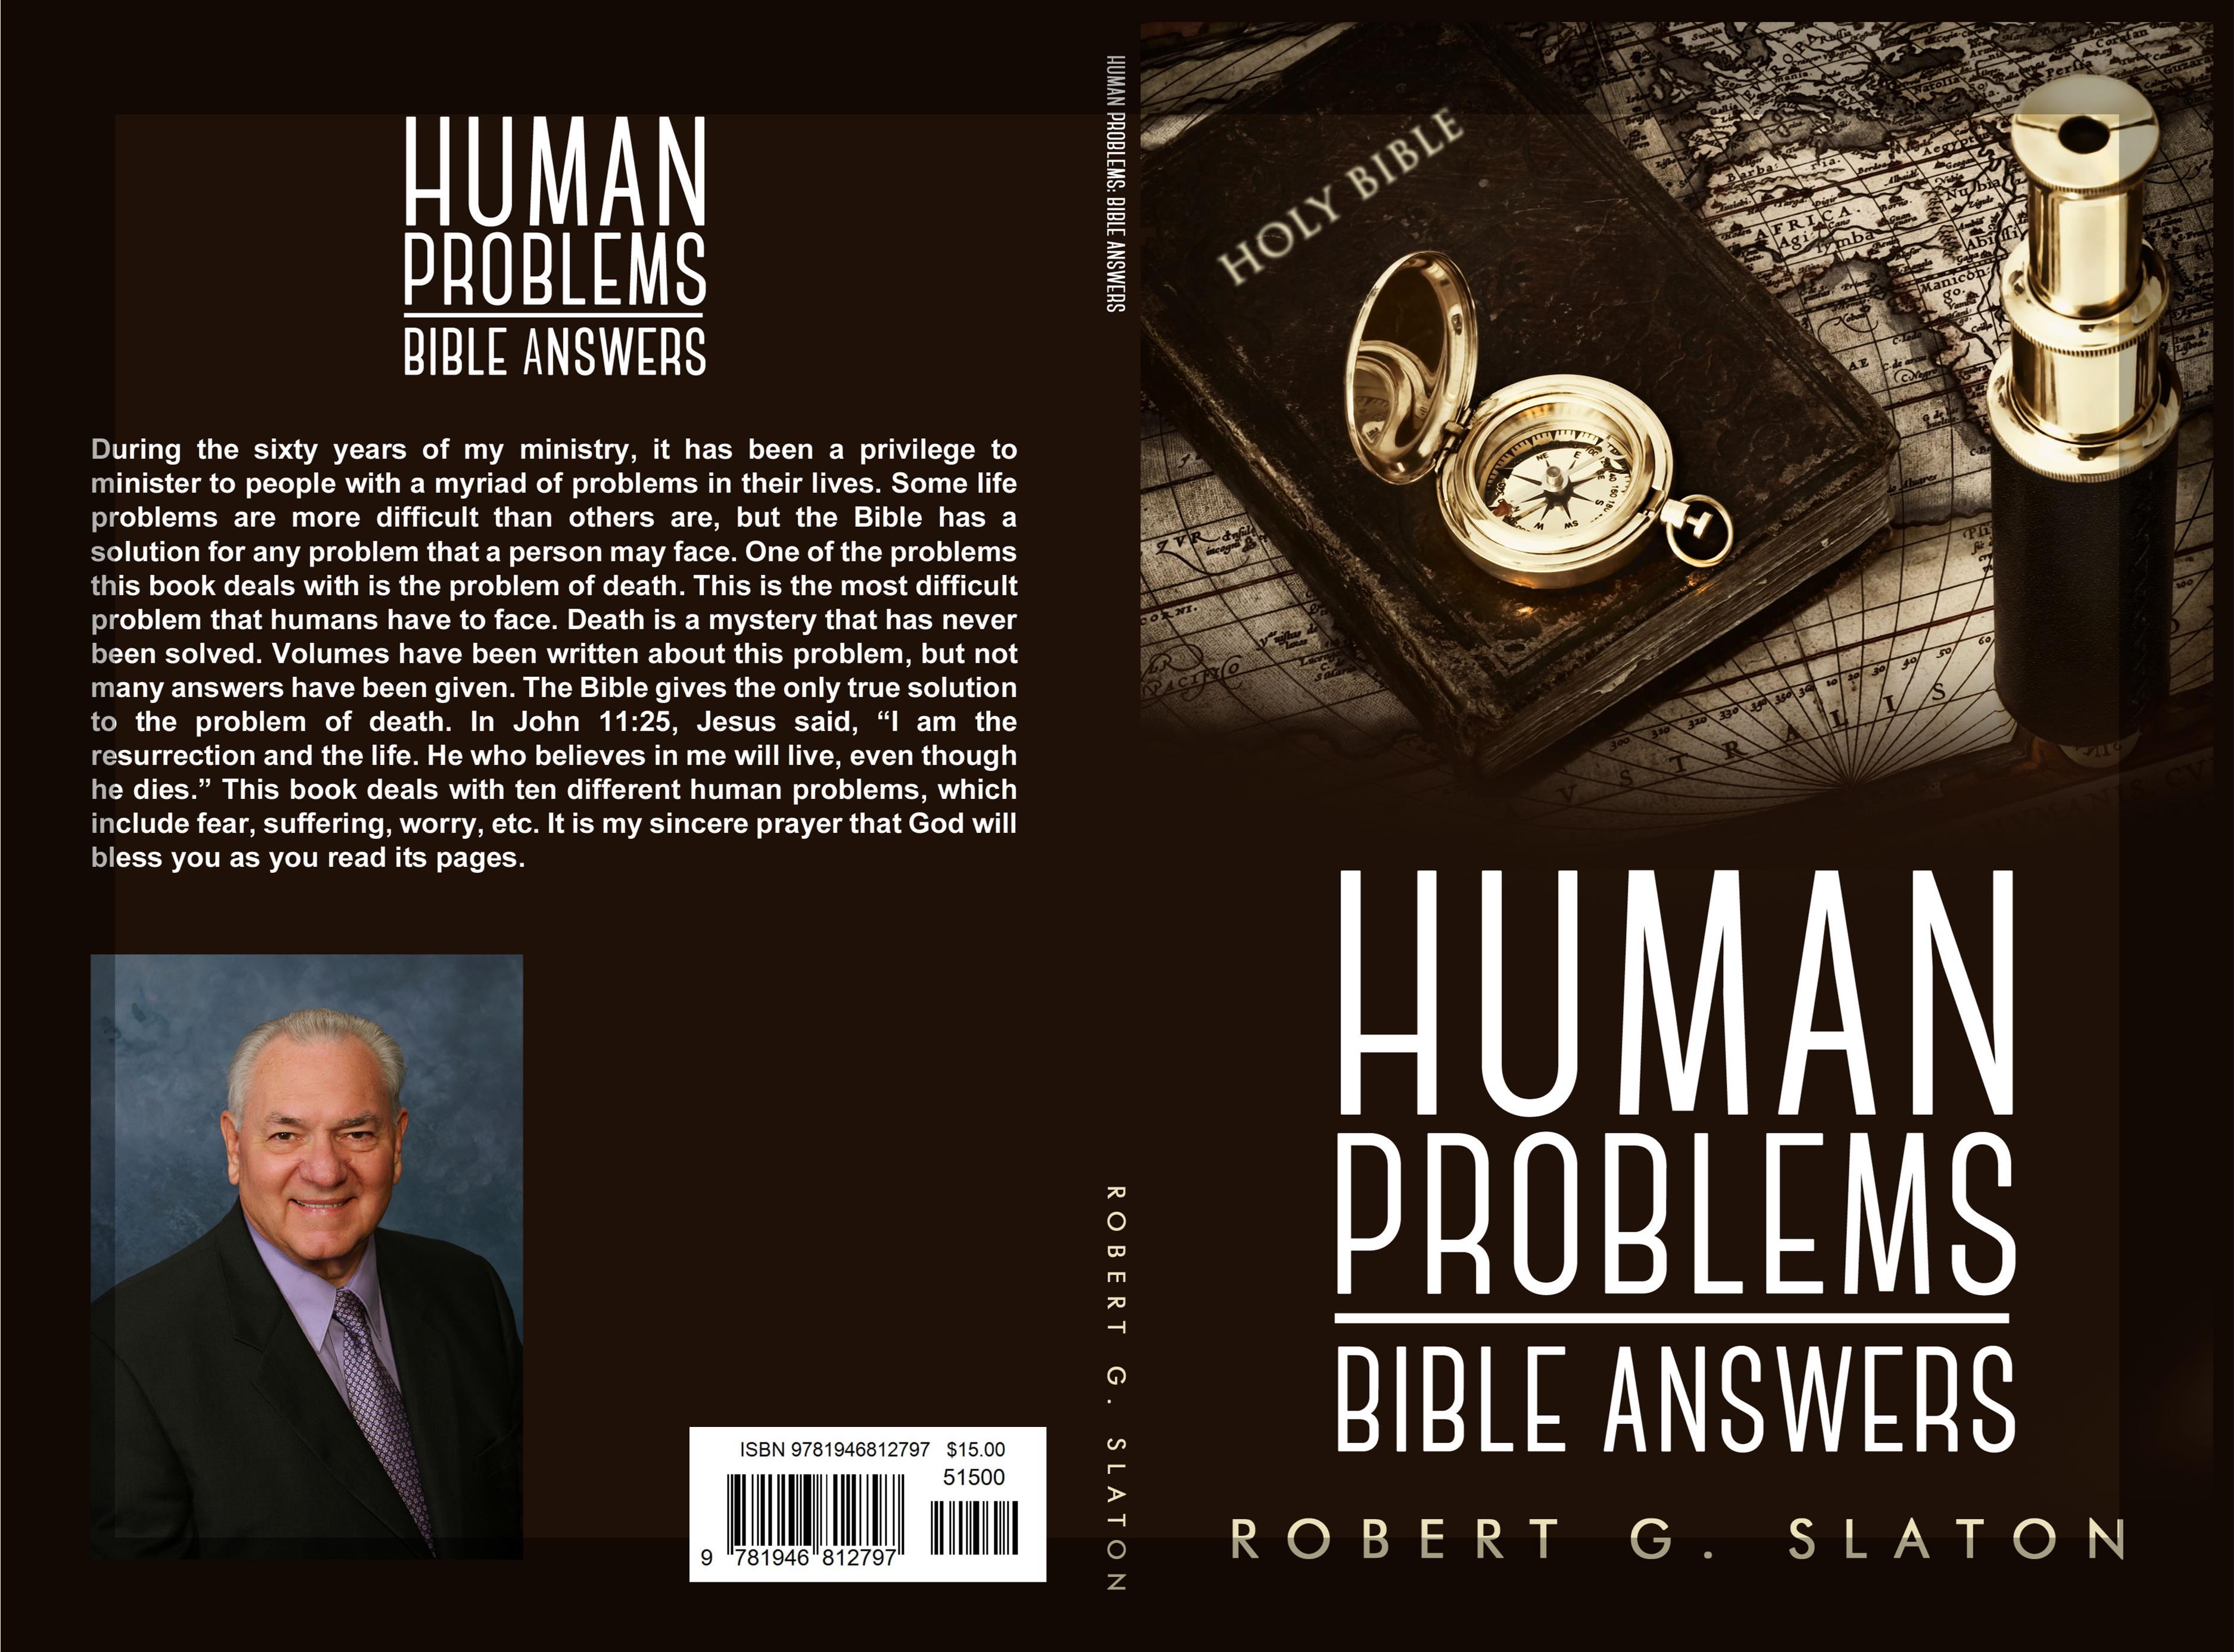 Human Problems Bible Answers cover image